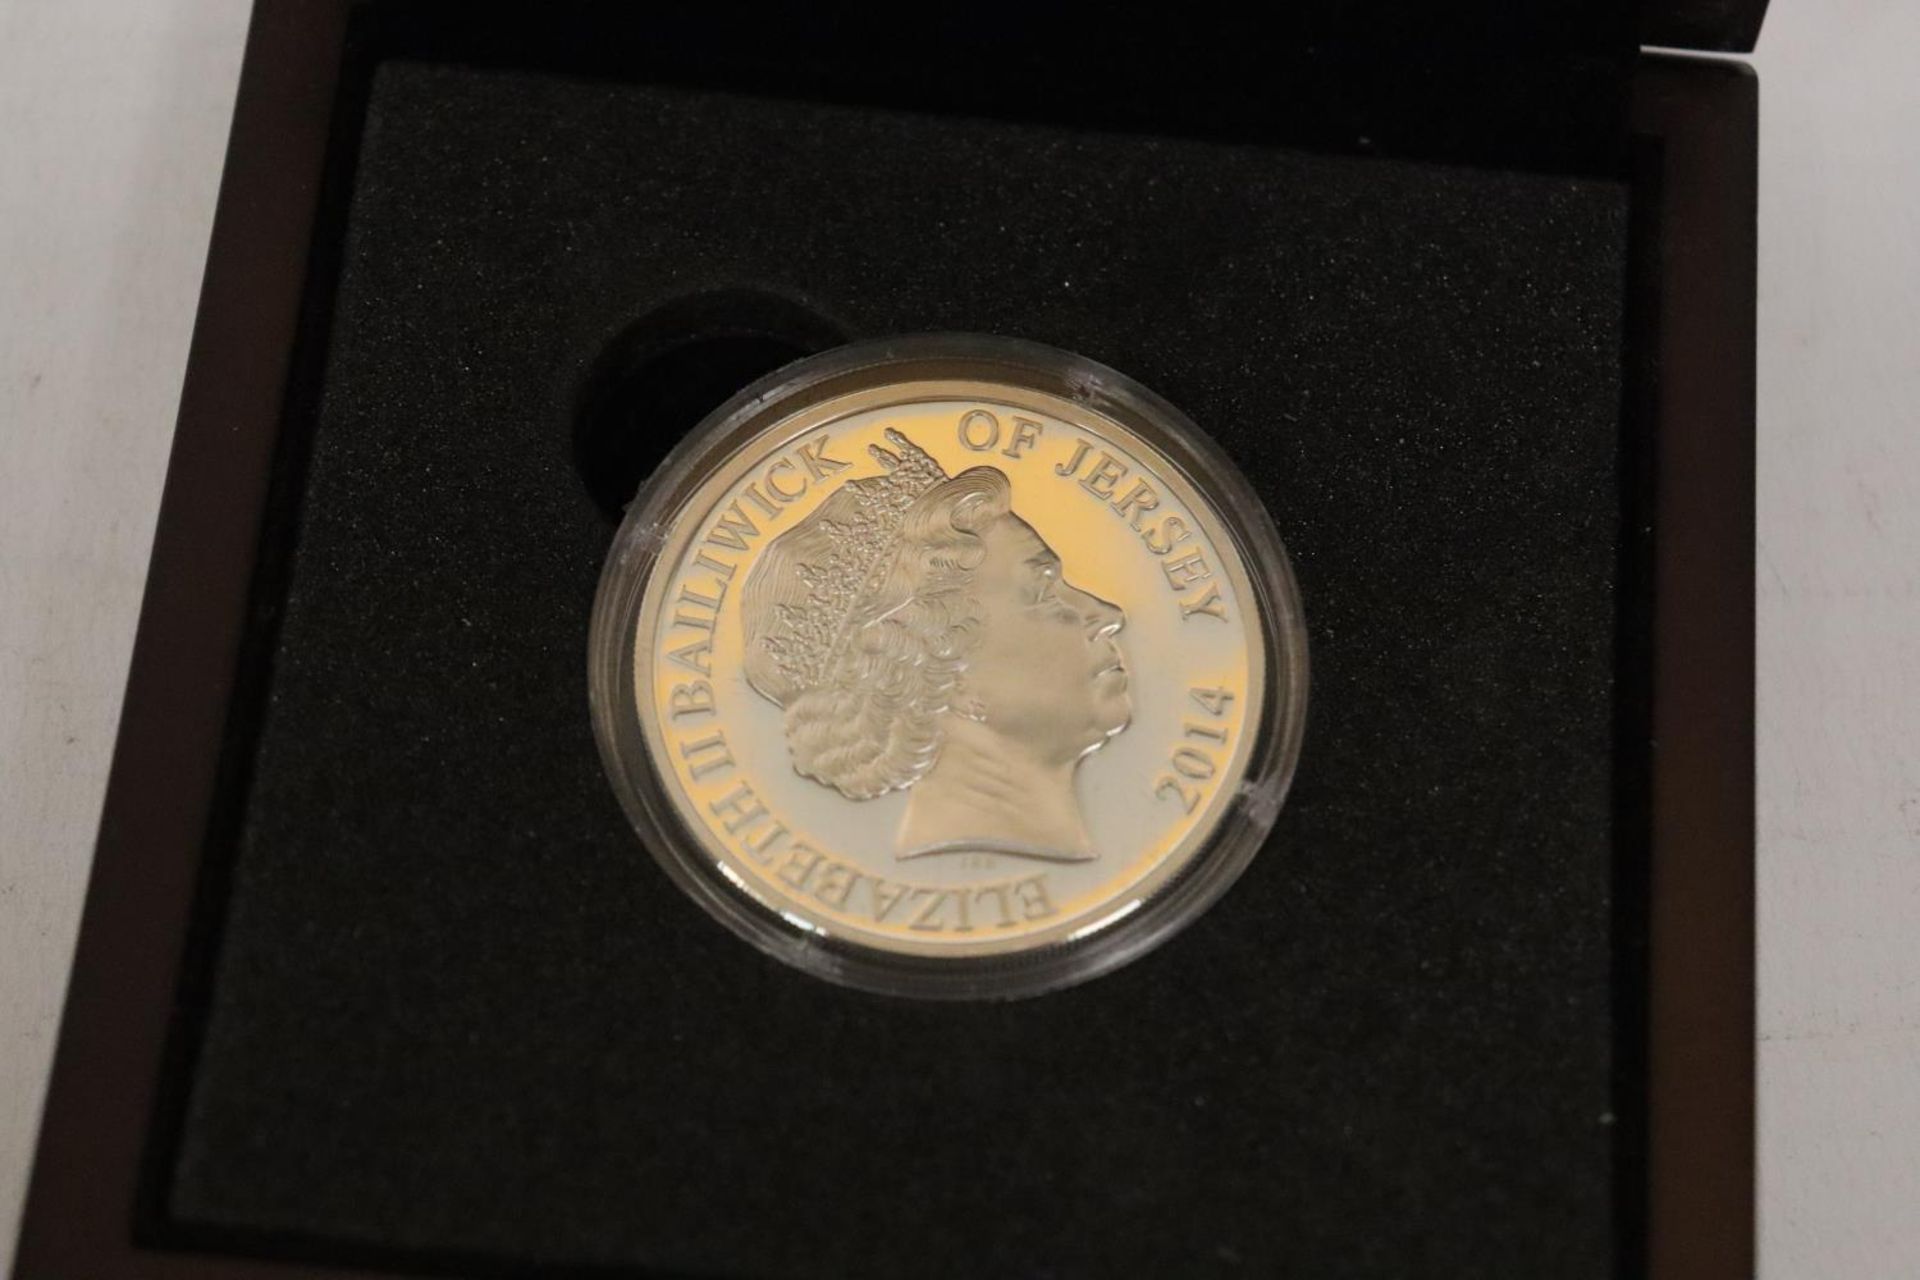 JERSEY 2014 , 70TH ANNIVERSARY OF D-DAY , £5 SILVER PROOF COIN . BOXED & ENCAPSULATED - Image 2 of 4